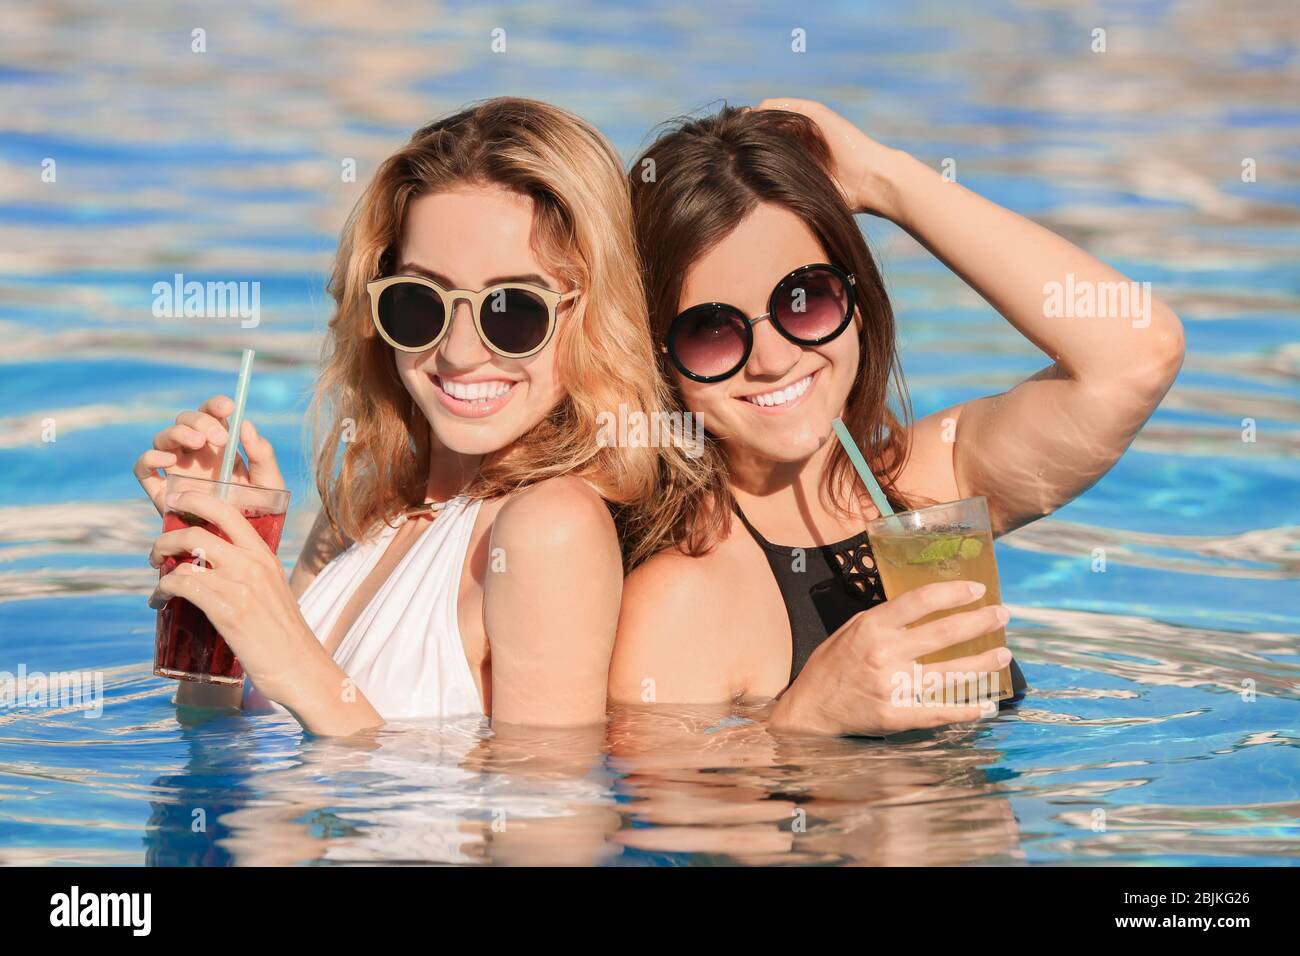 Two beautiful women with cocktails relaxing in pool Stock Photo